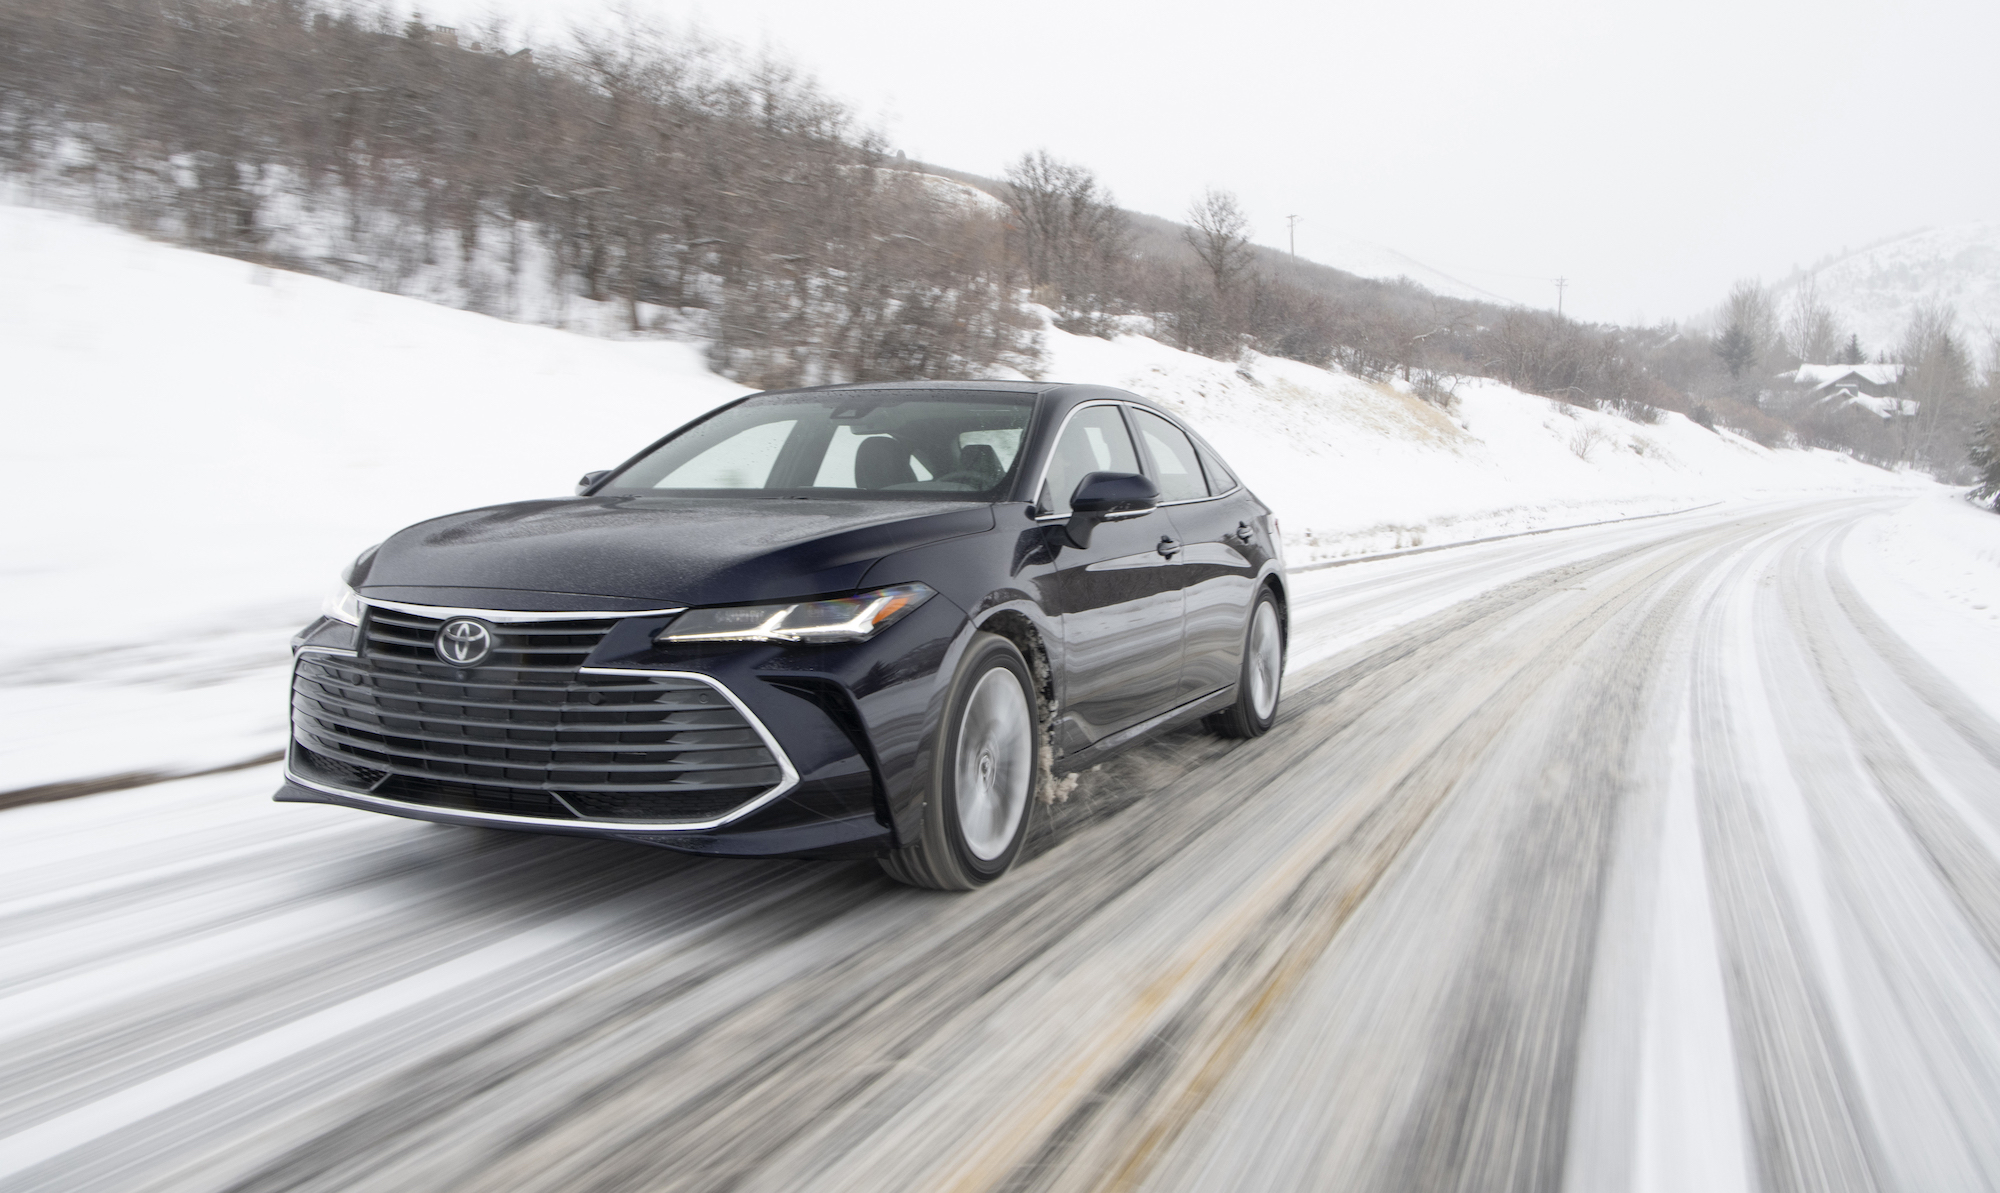 The 2021 Toyota Avalon Is the Best Full-Size Sedan to Buy This Year